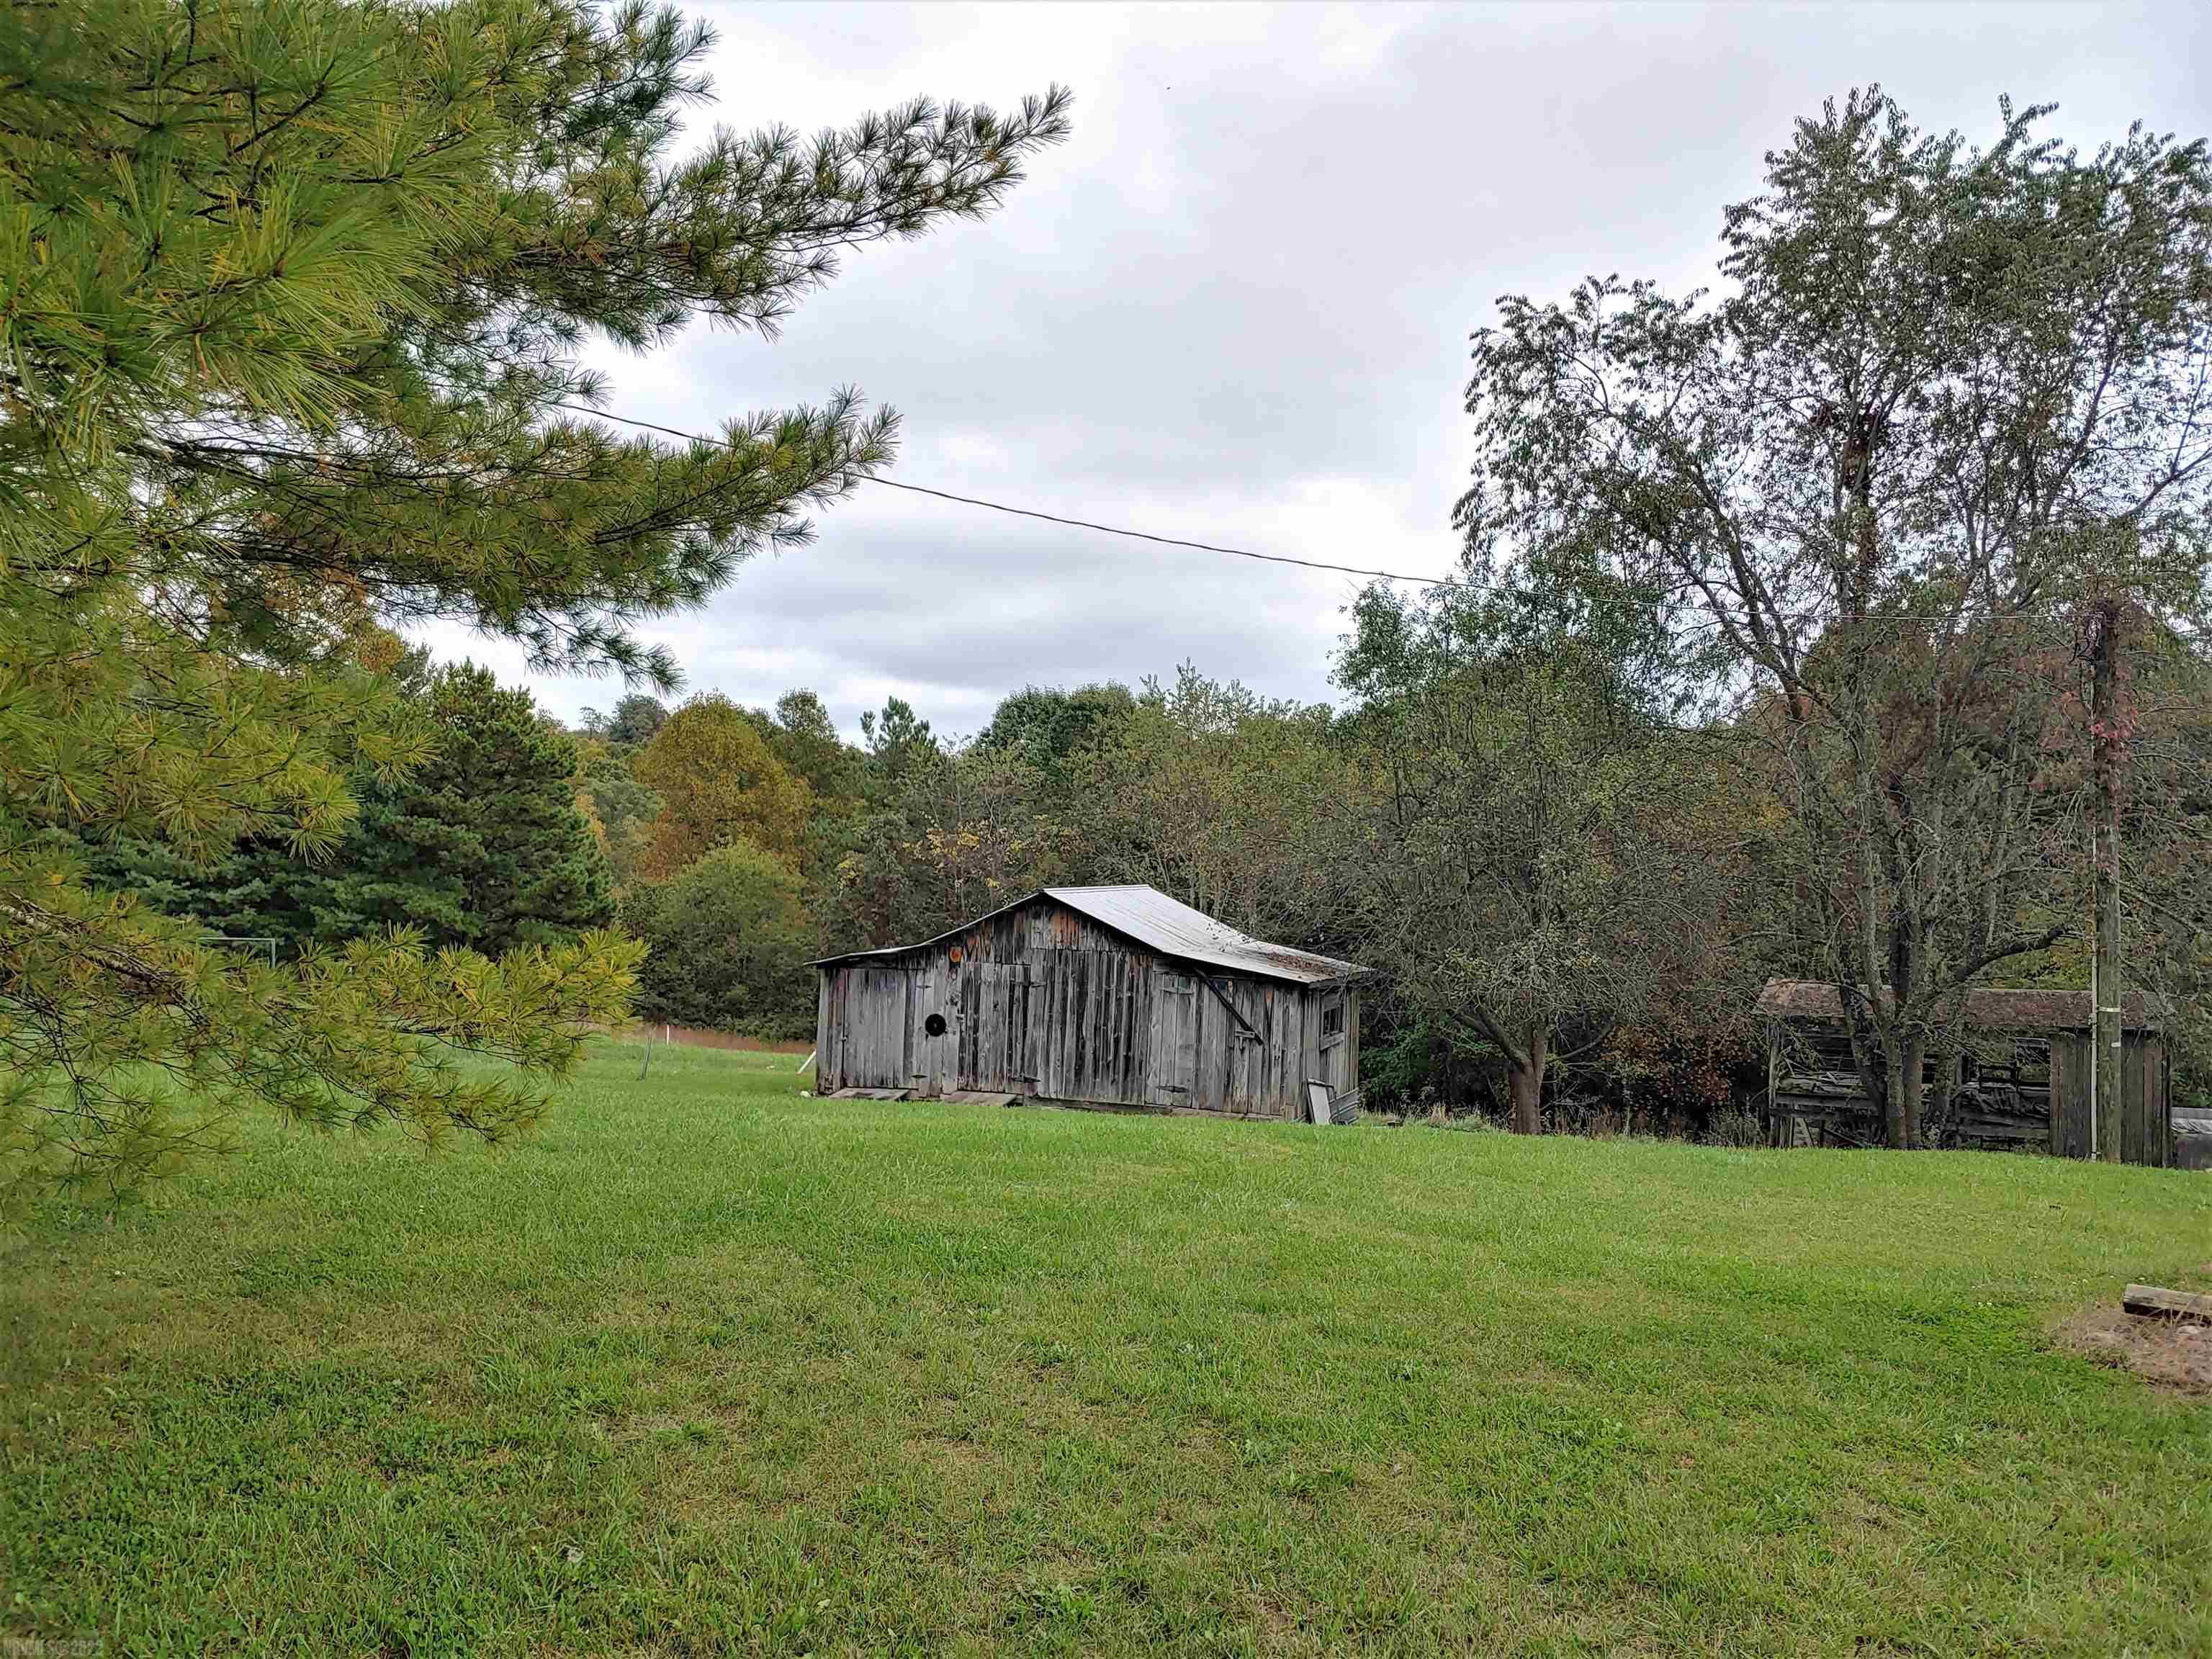 A property that is very ready for you to bring that new home HOME. A very excellent beautiful tract of land with a stream running through it. County Approved septic system already installed. Electric meter base already in place. 15 minutes to Christiansburg.